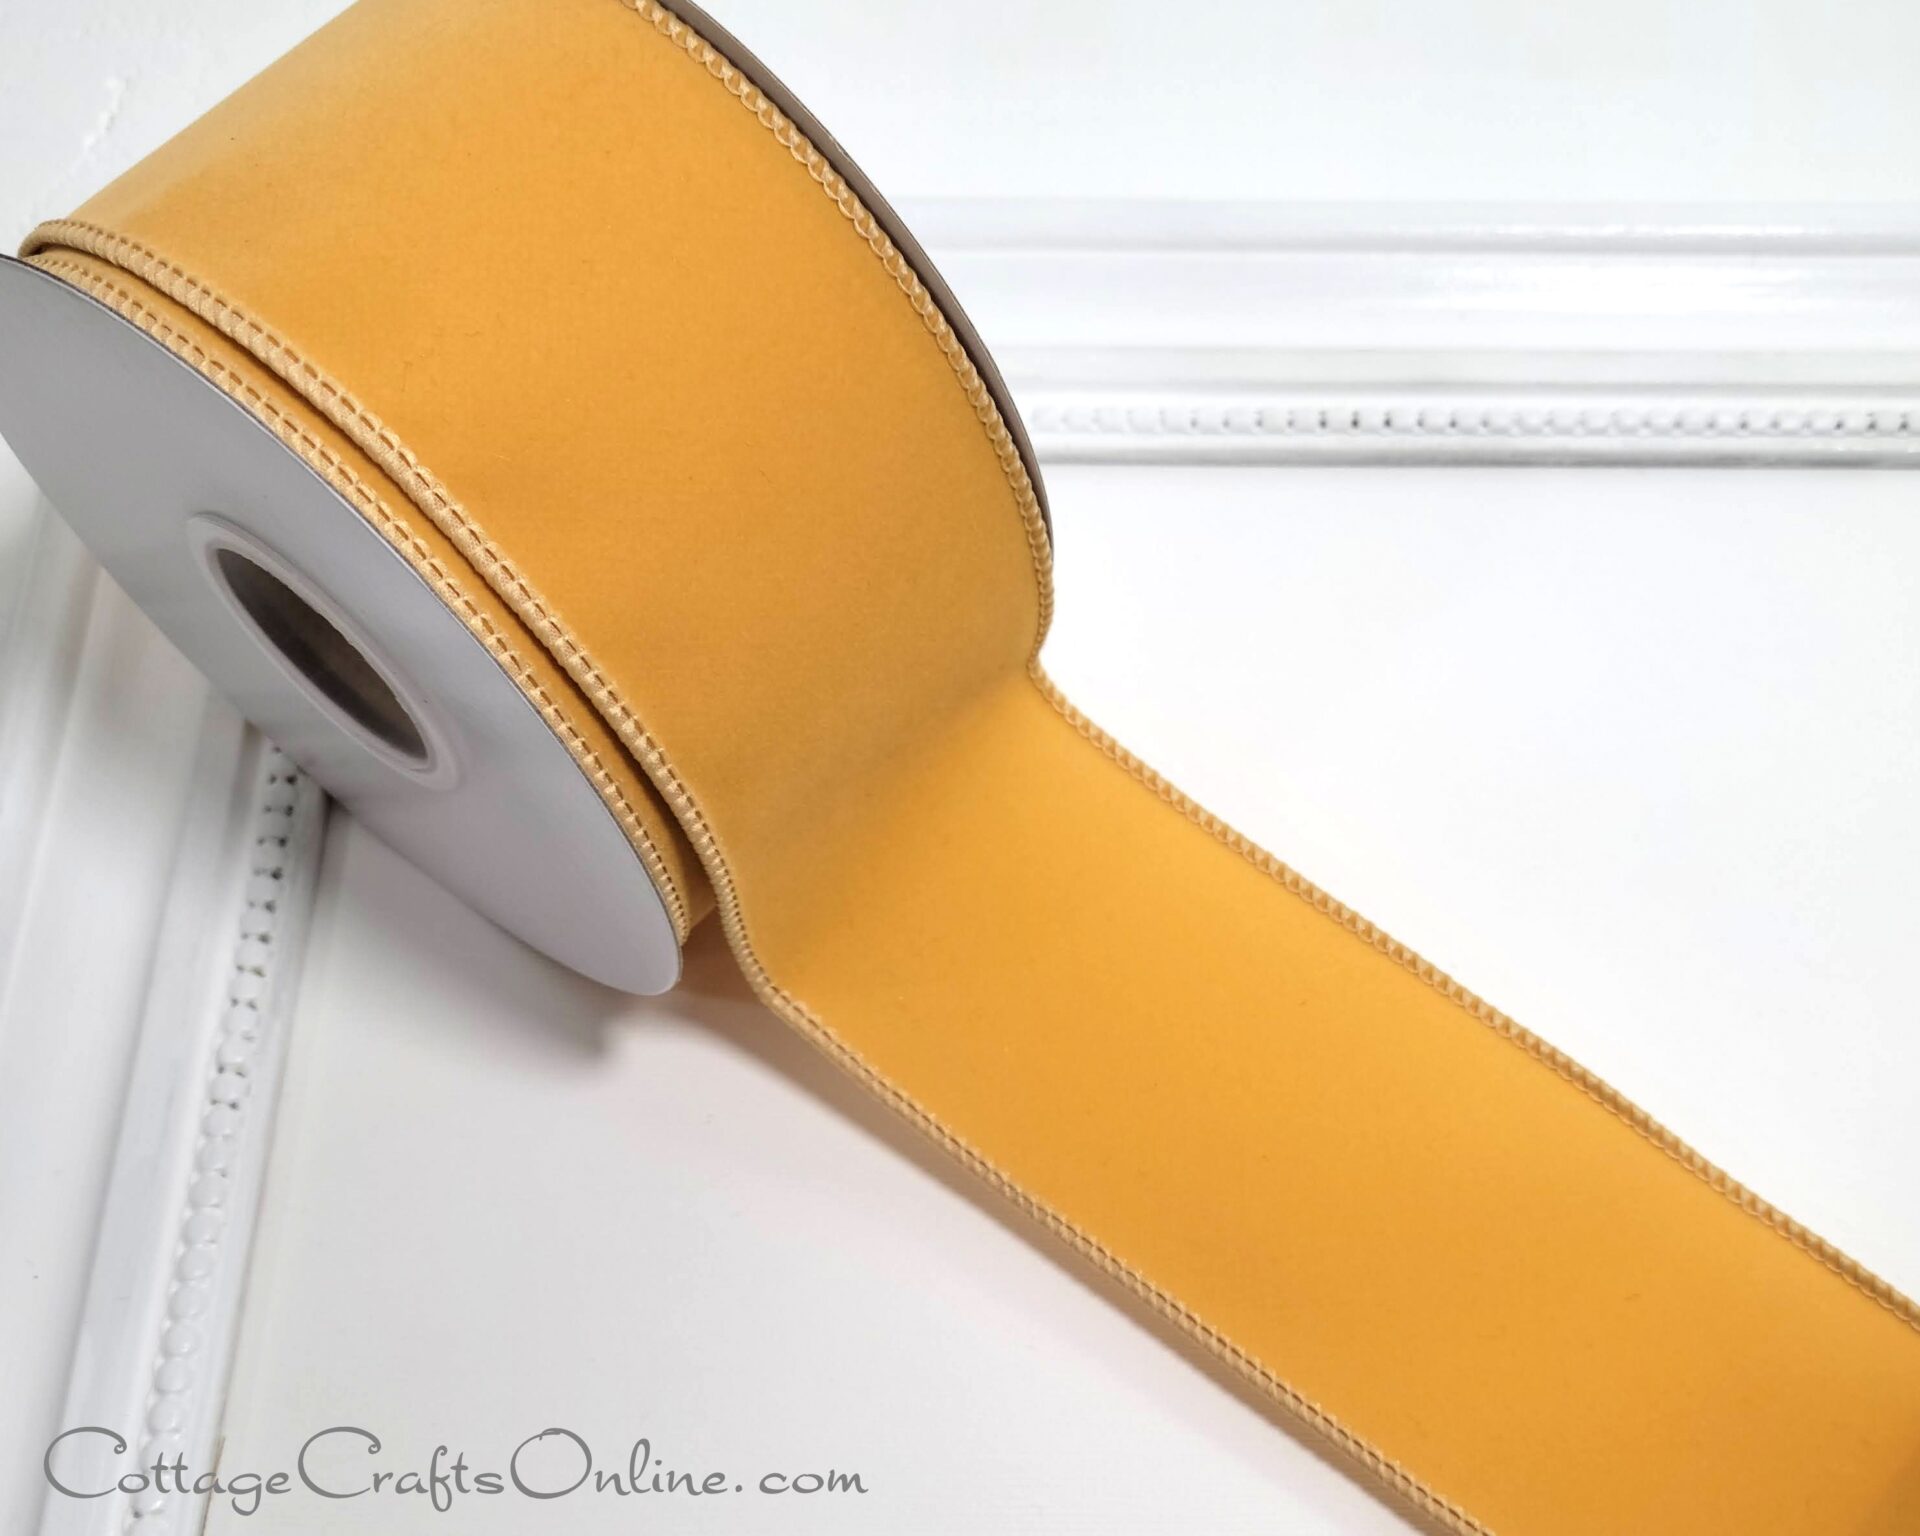 a roll of yellow satin ribbon adorned on a white frame for the new holiday season of 2022.